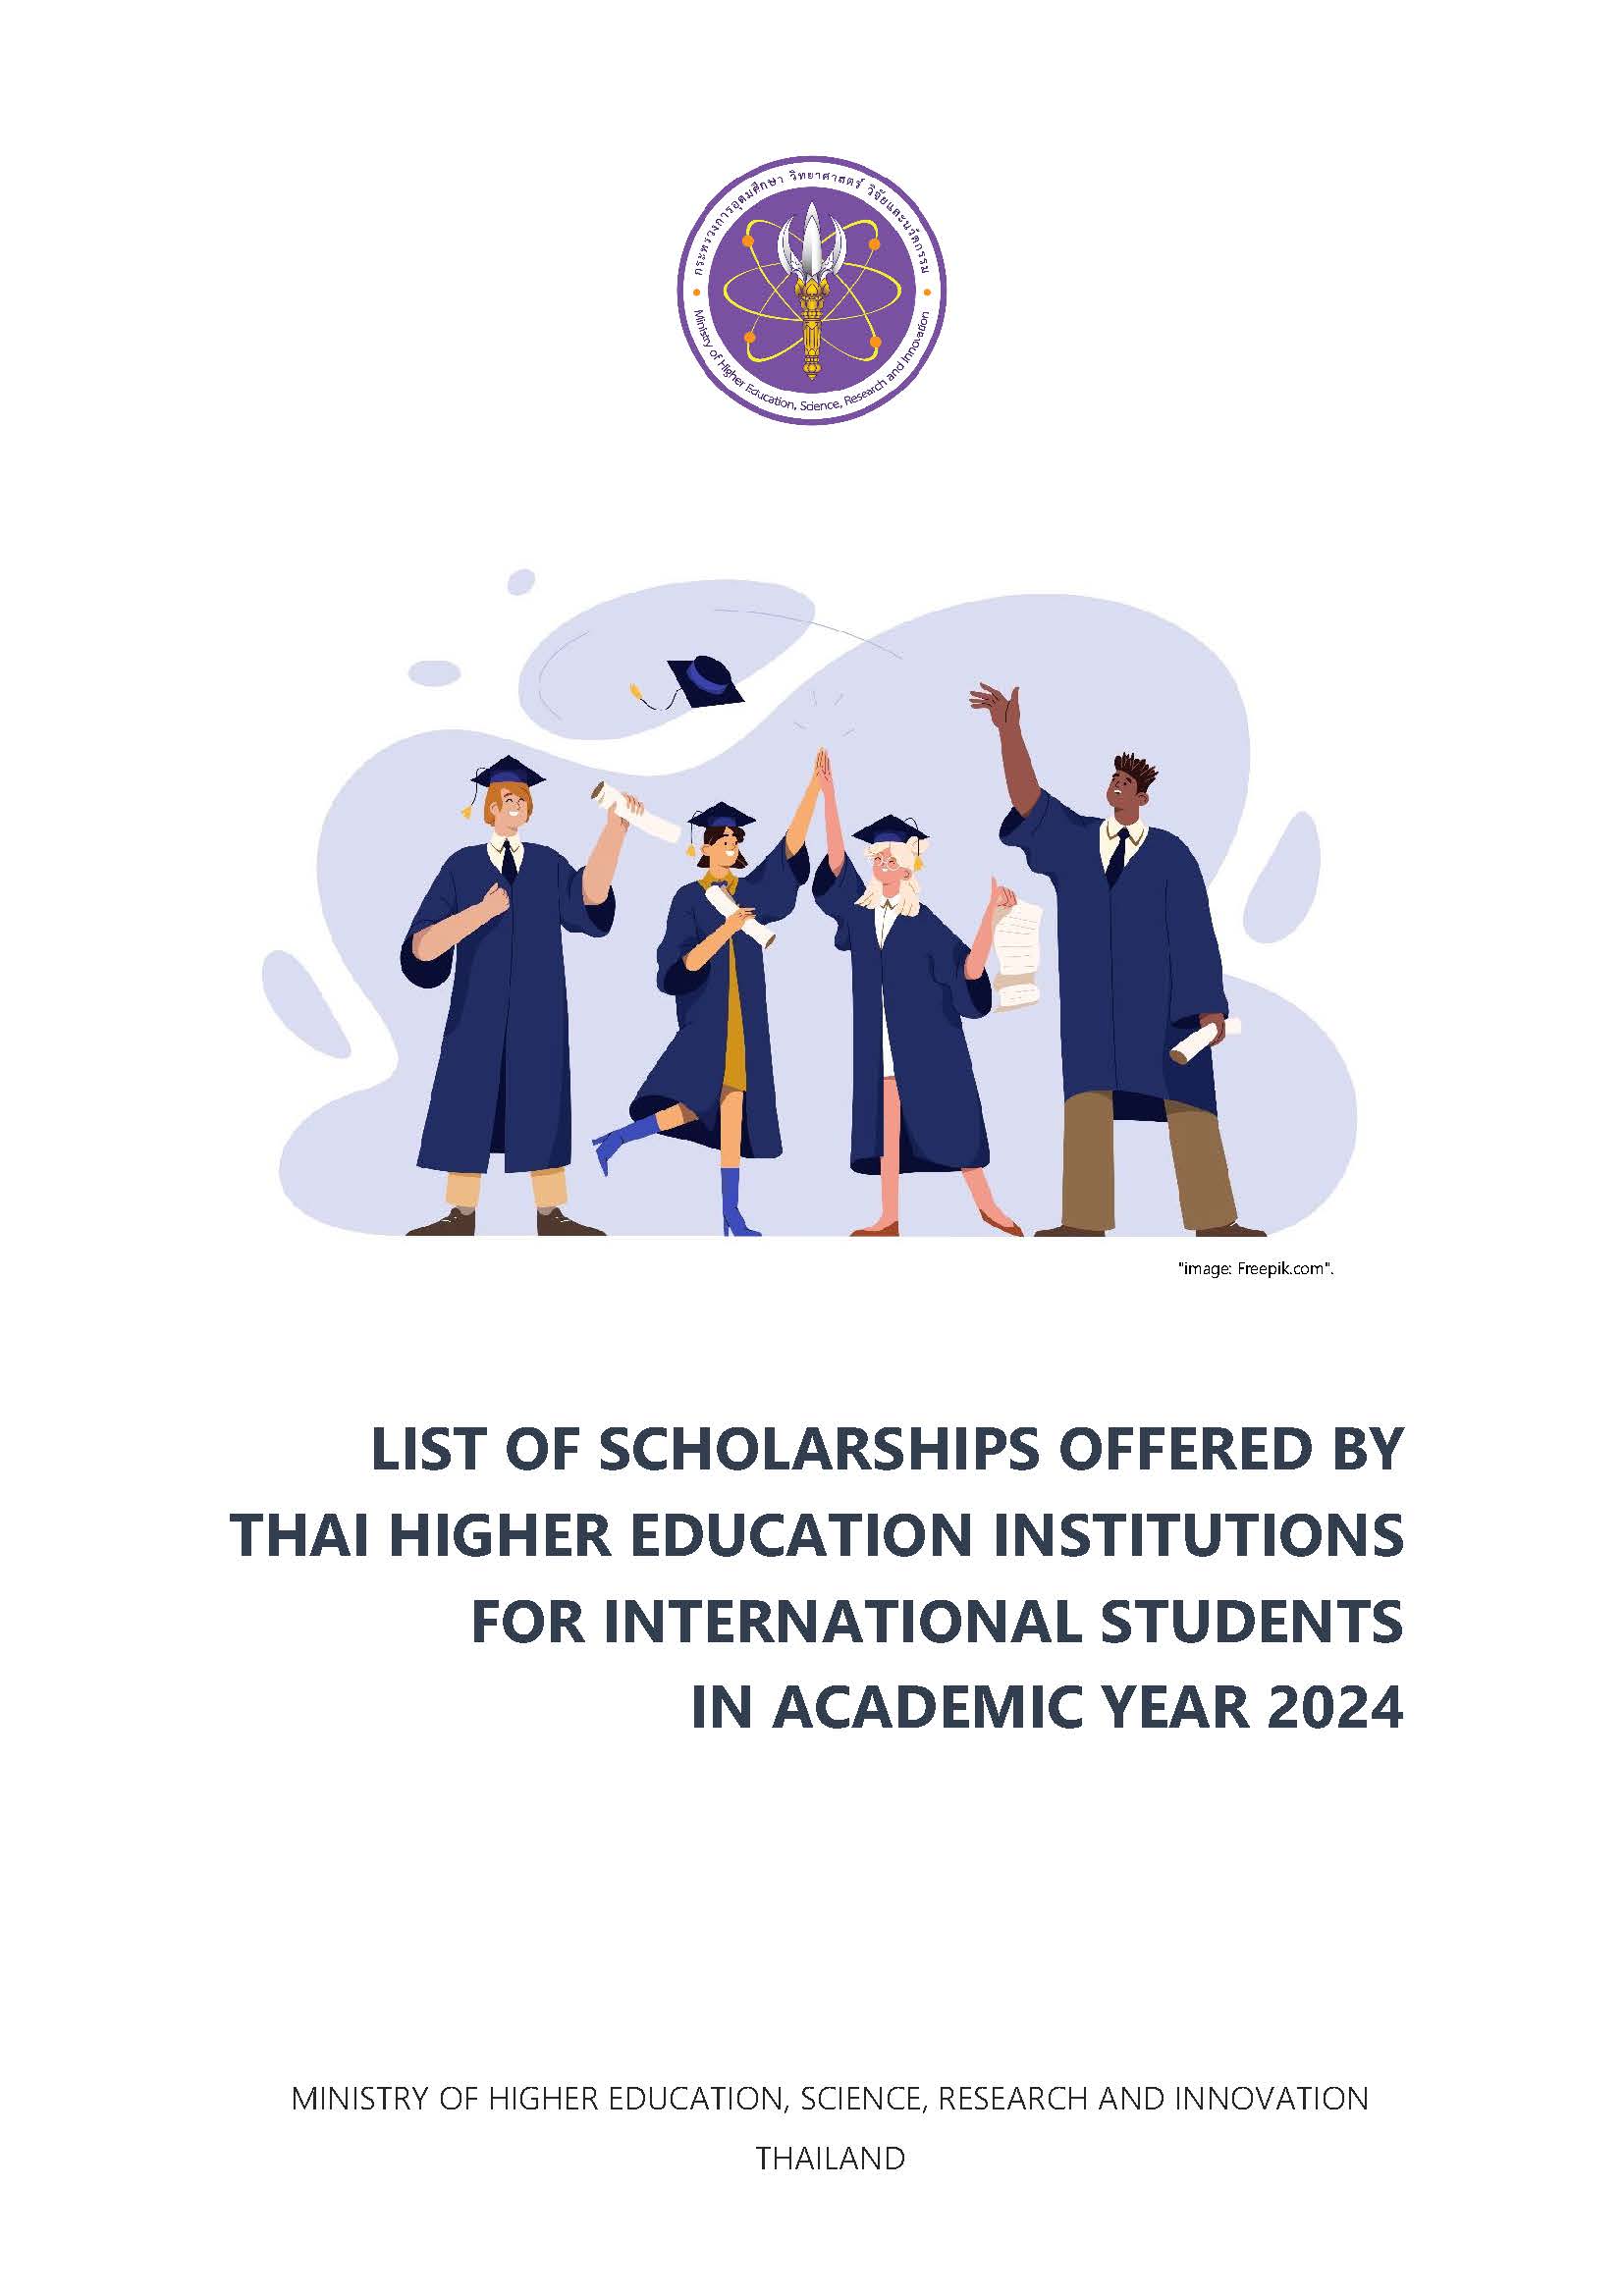 Scholarships offered by Thai University for International Students in Academic Year 2024